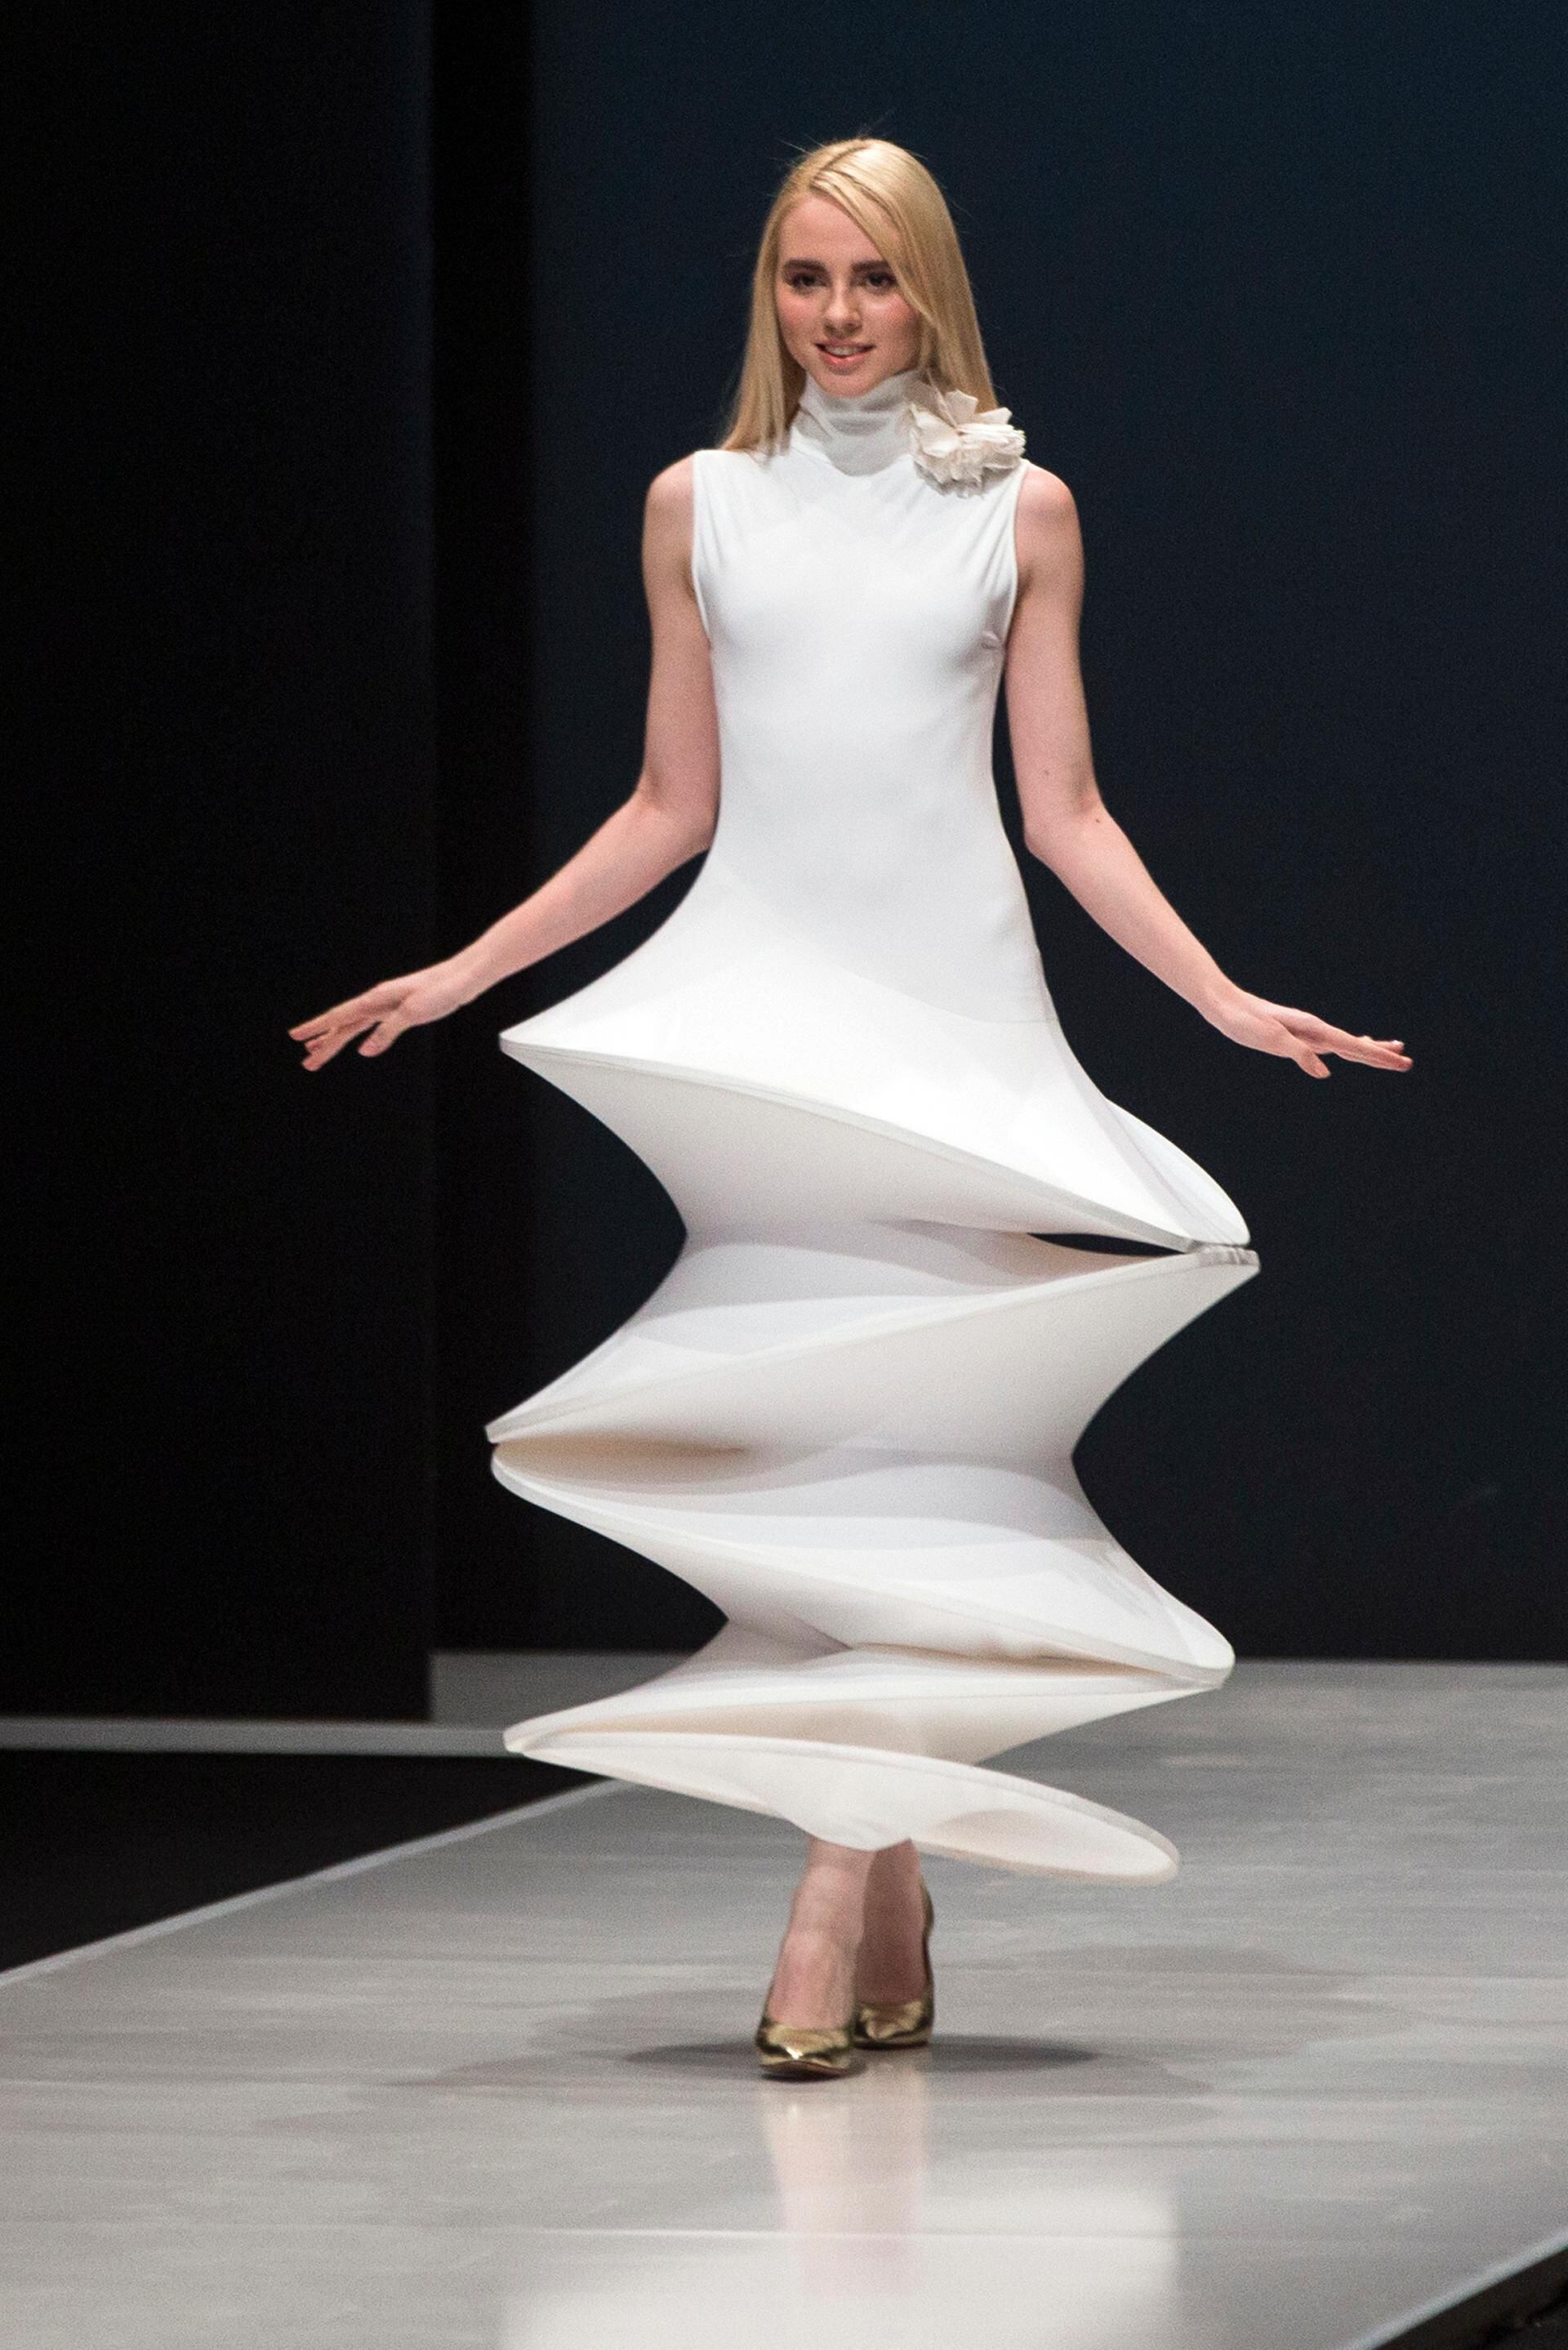 Pierre Cardin: Future Fashion” Brings Space-Age French Design to